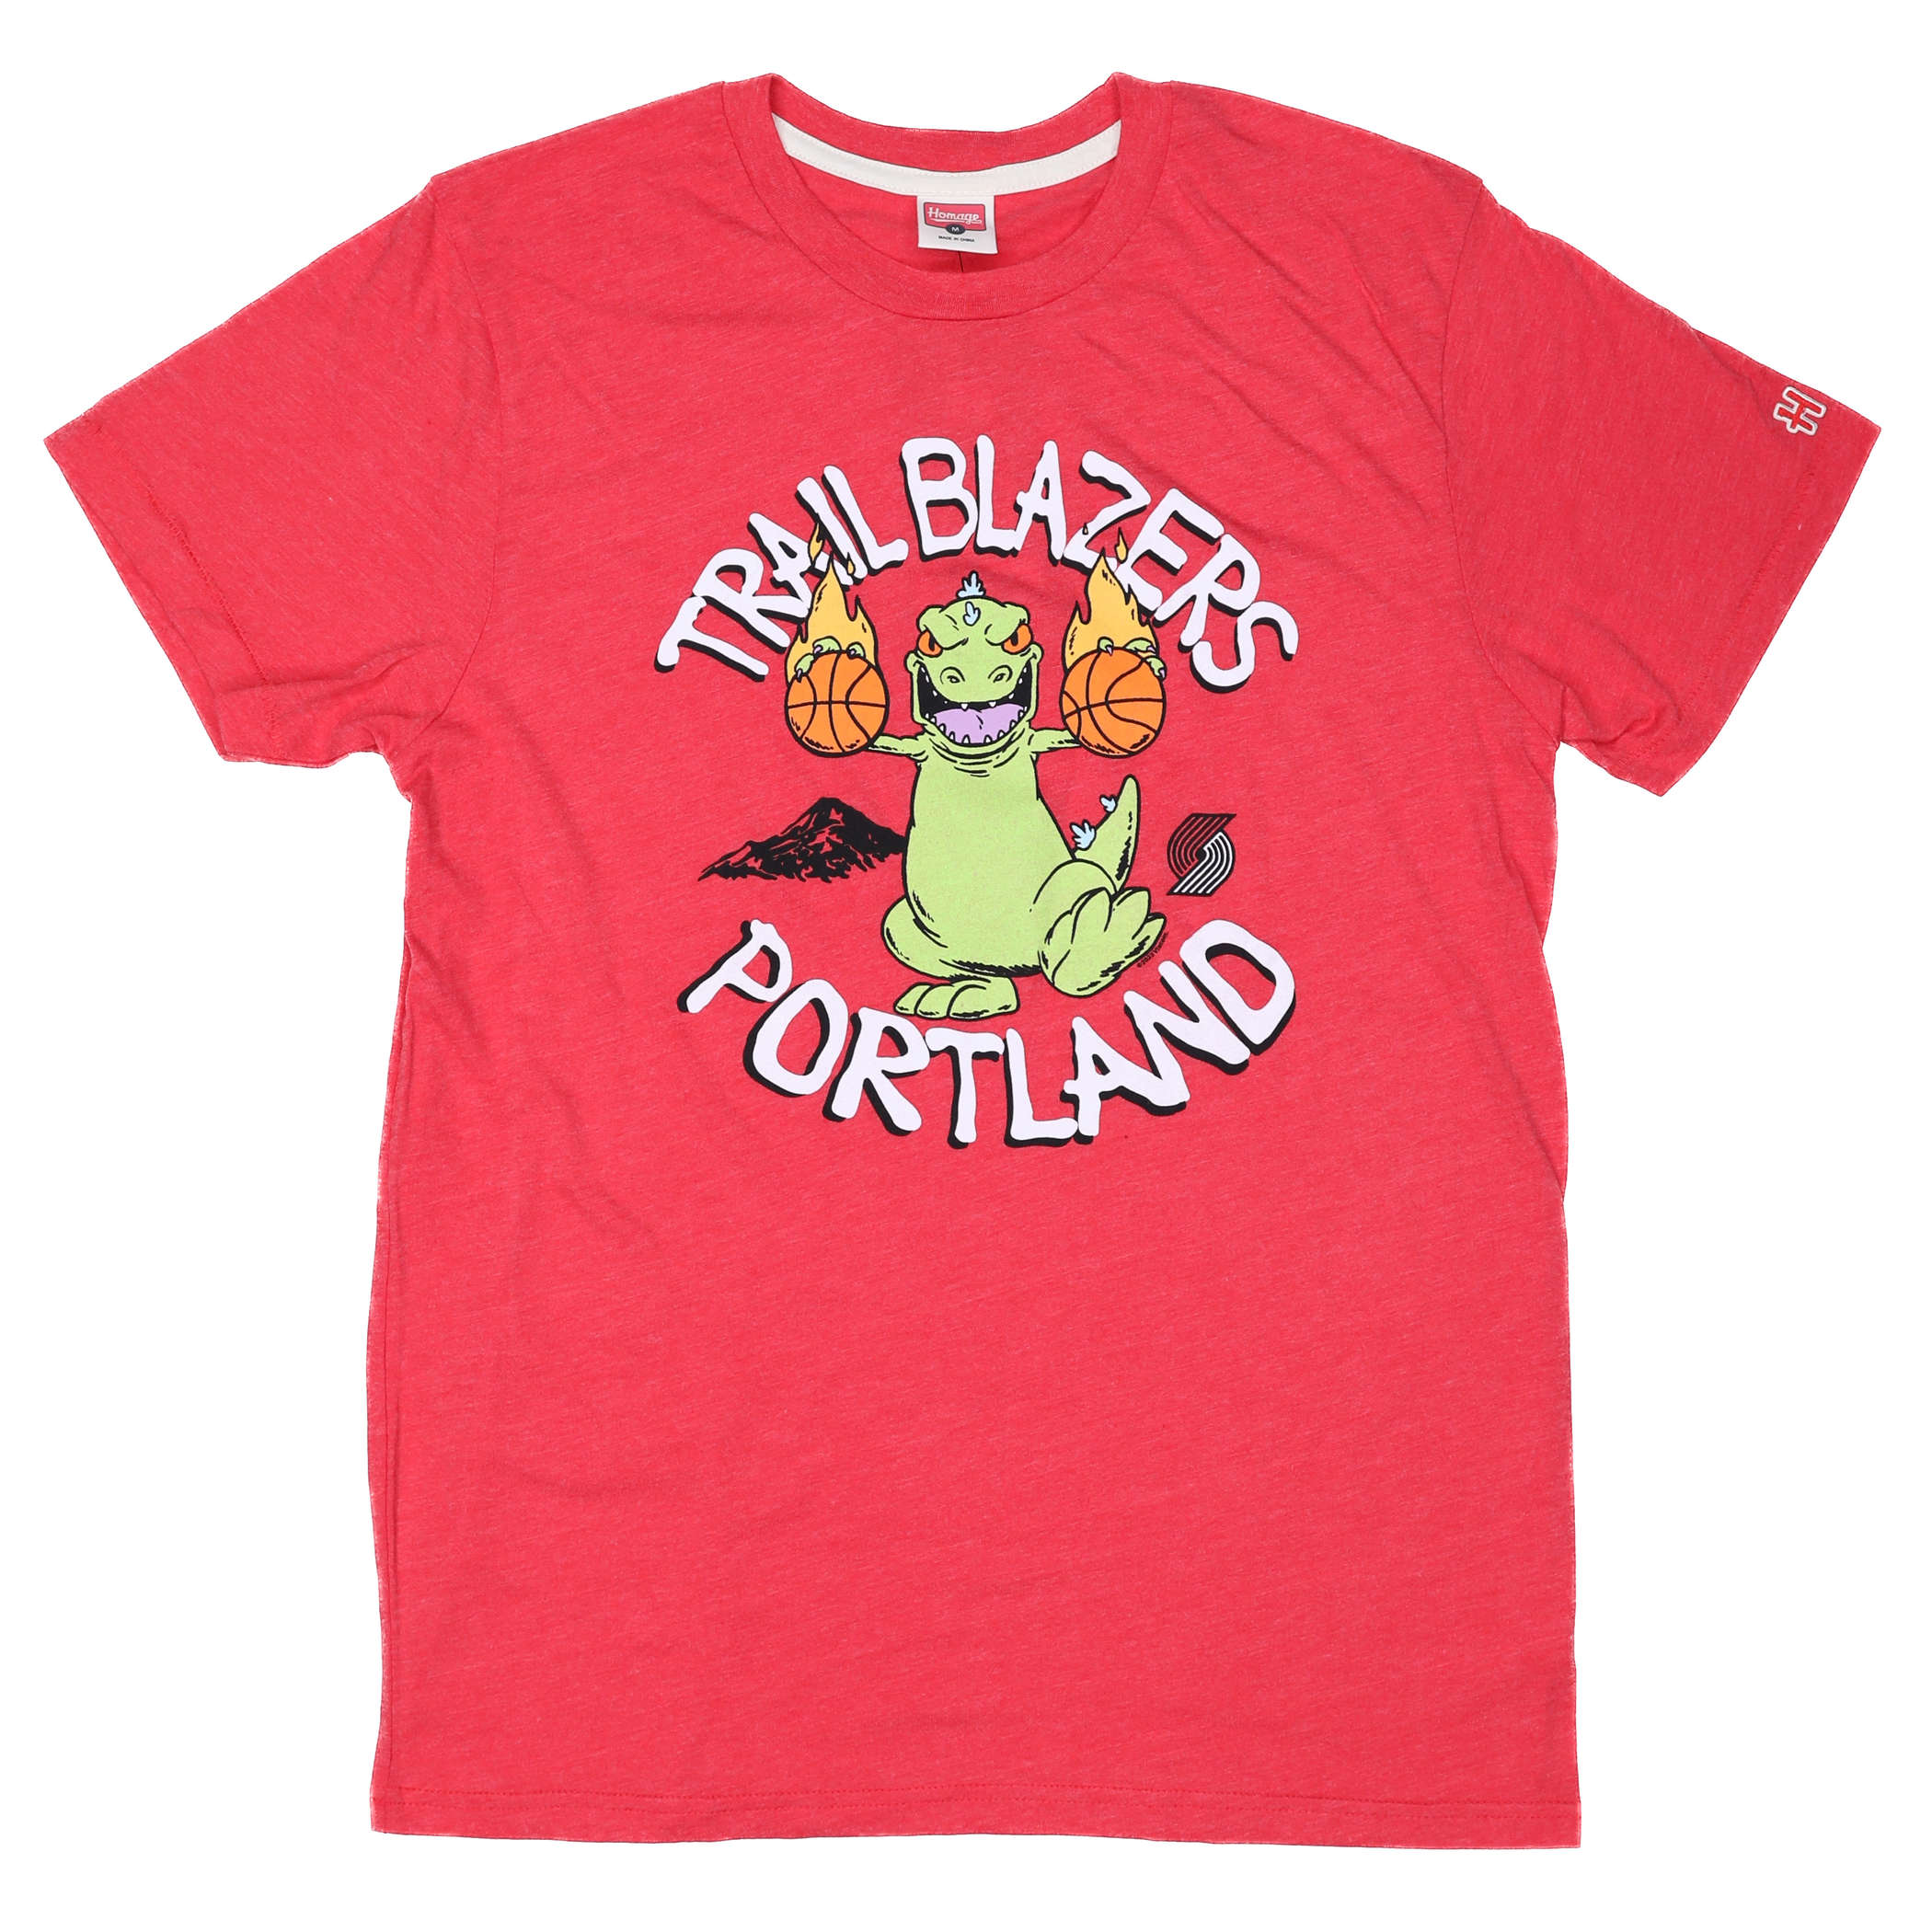 Portland Trail Blazers Homage Rugrats Red T - Shirt - S - 